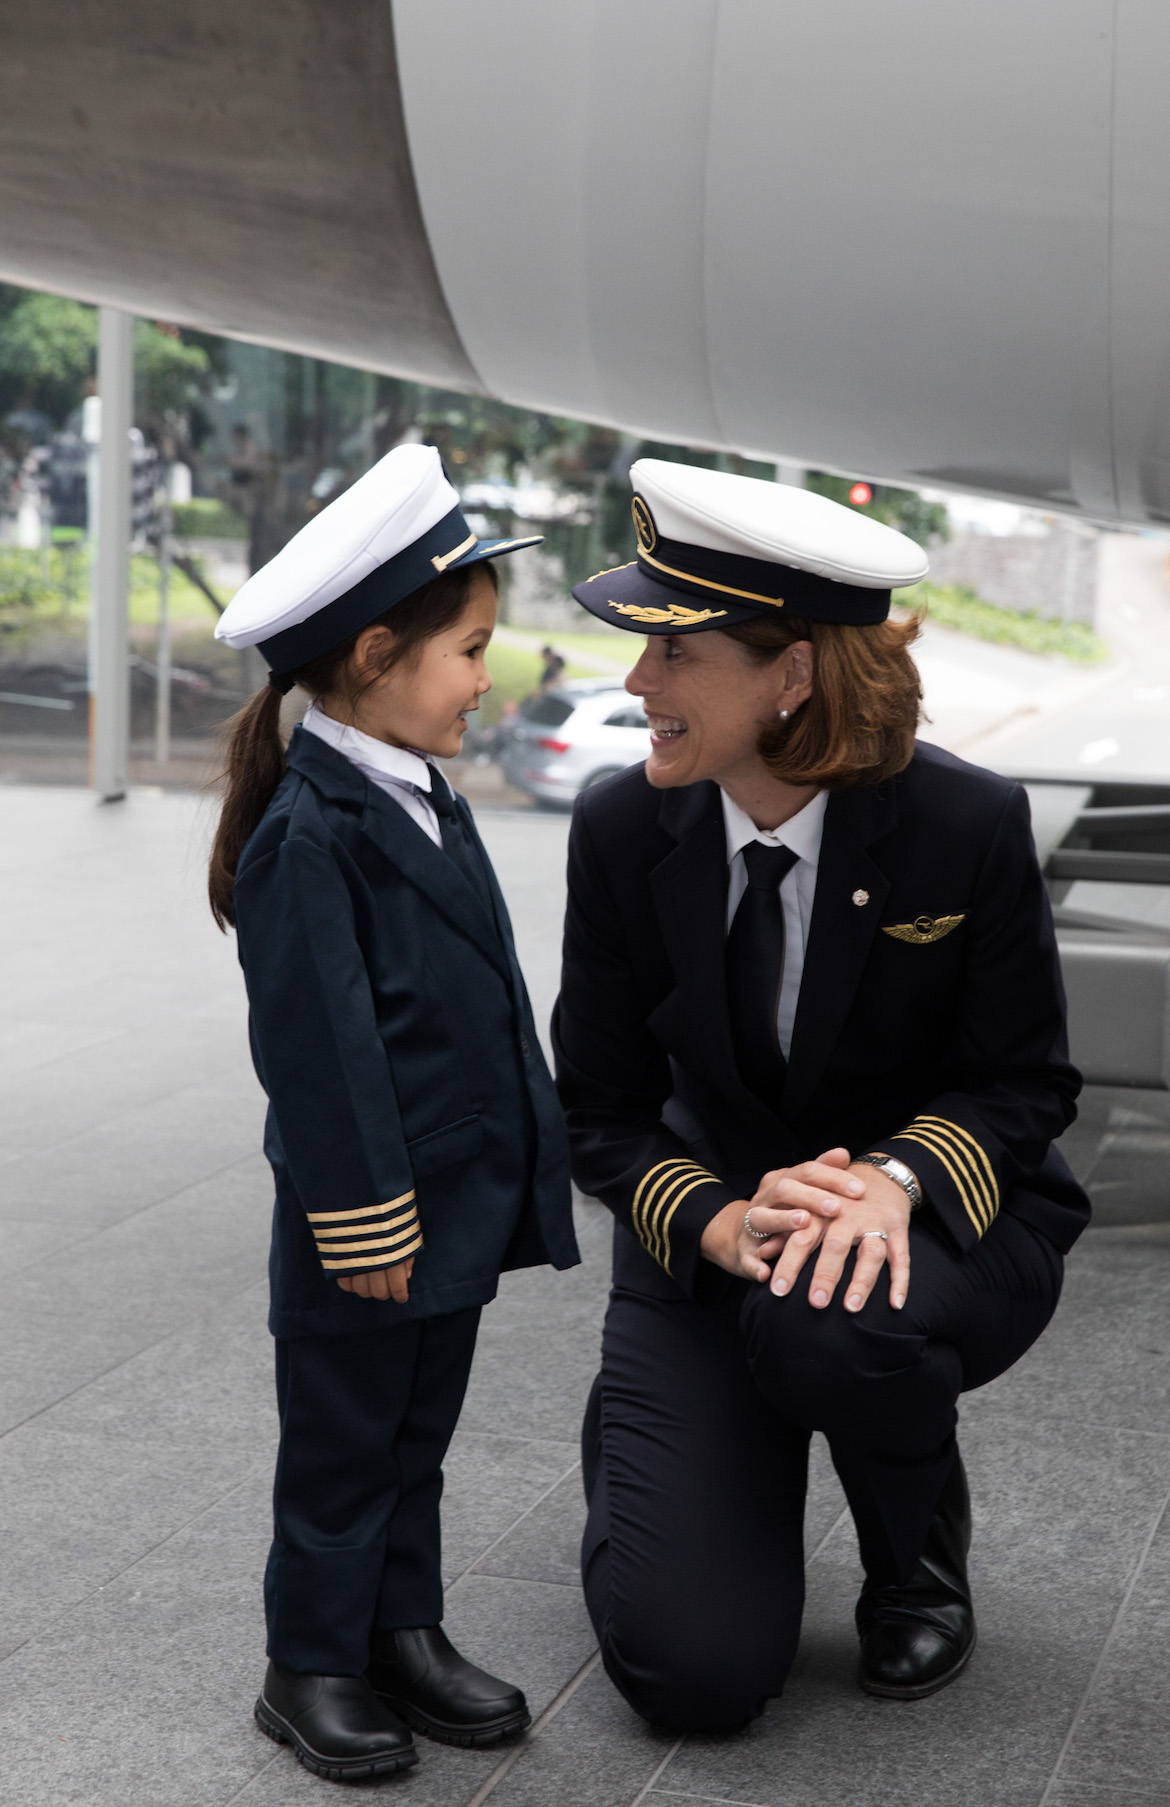 The Qantas Group has committed to a 20 per cent intake for its 2018 cadet pilot program. (Qantas)